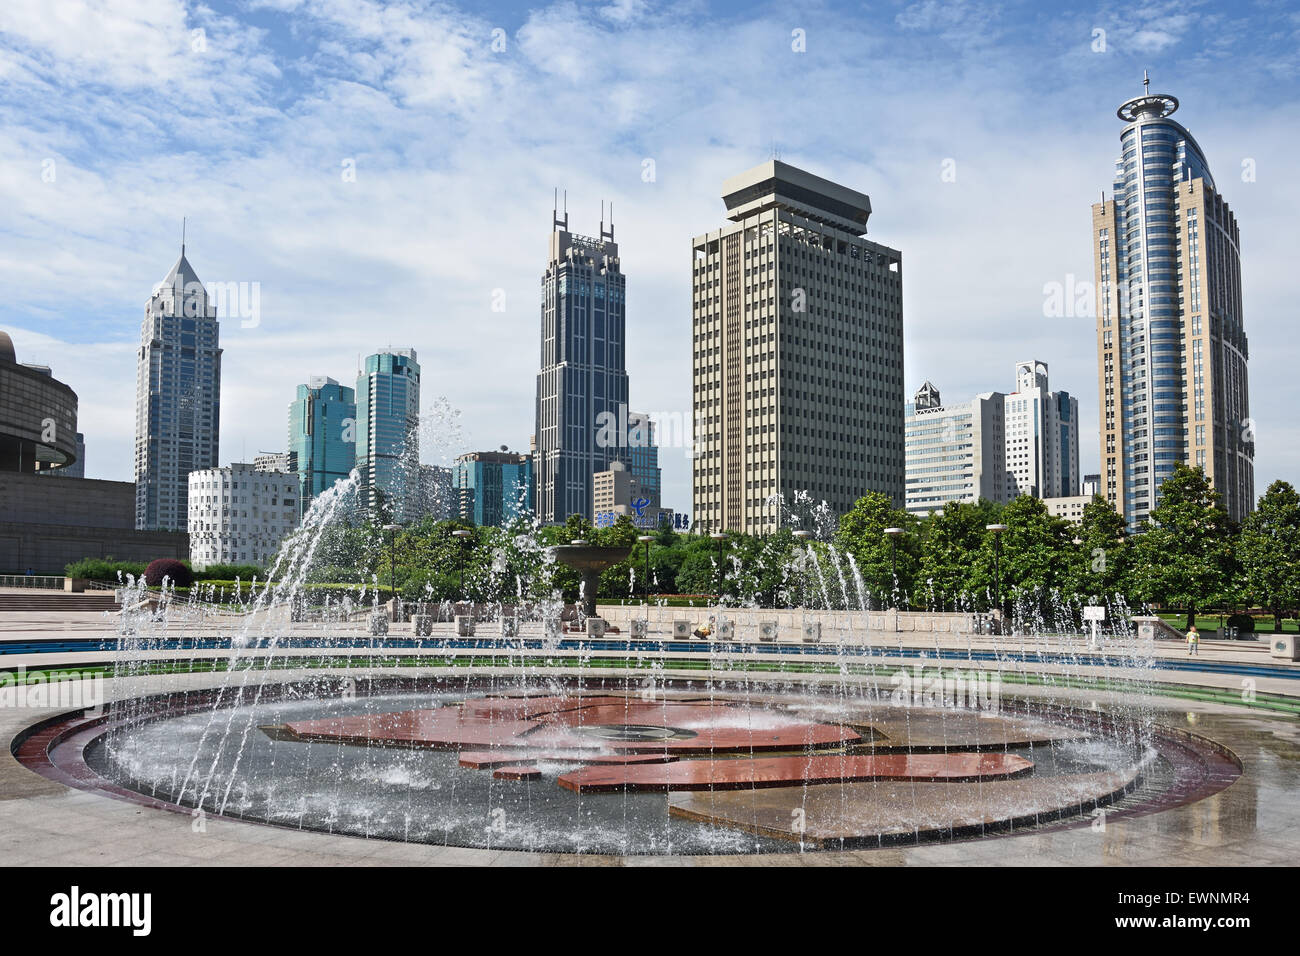 Fountain with people and children on People's Square Municipal Government Building Shanghai Municipality China skyline city Stock Photo